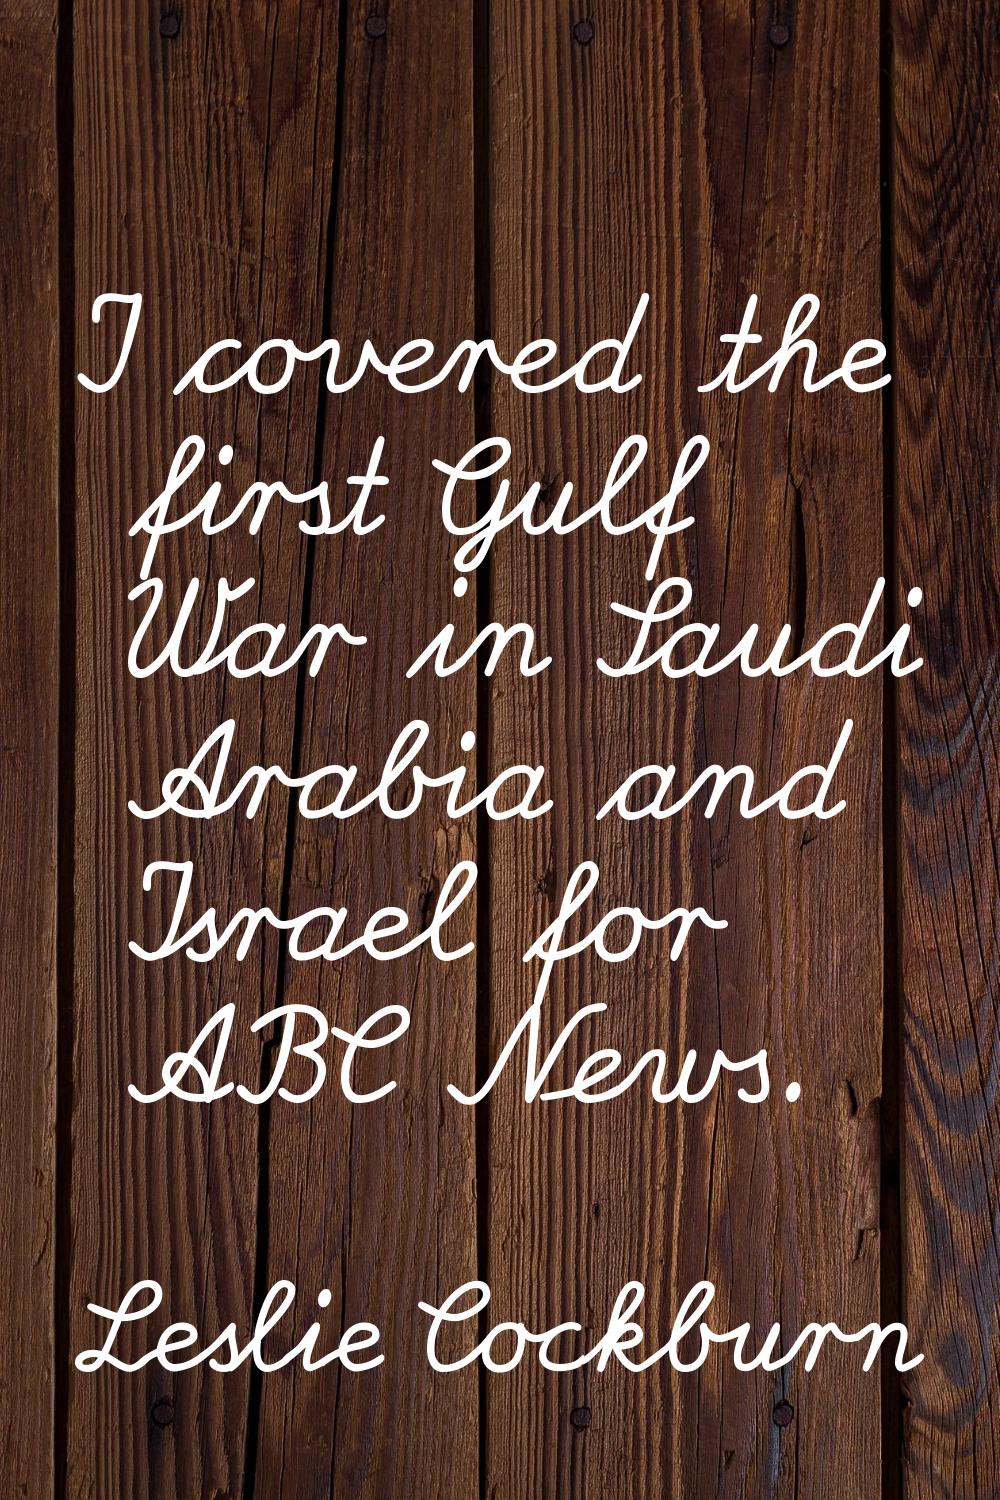 I covered the first Gulf War in Saudi Arabia and Israel for ABC News.